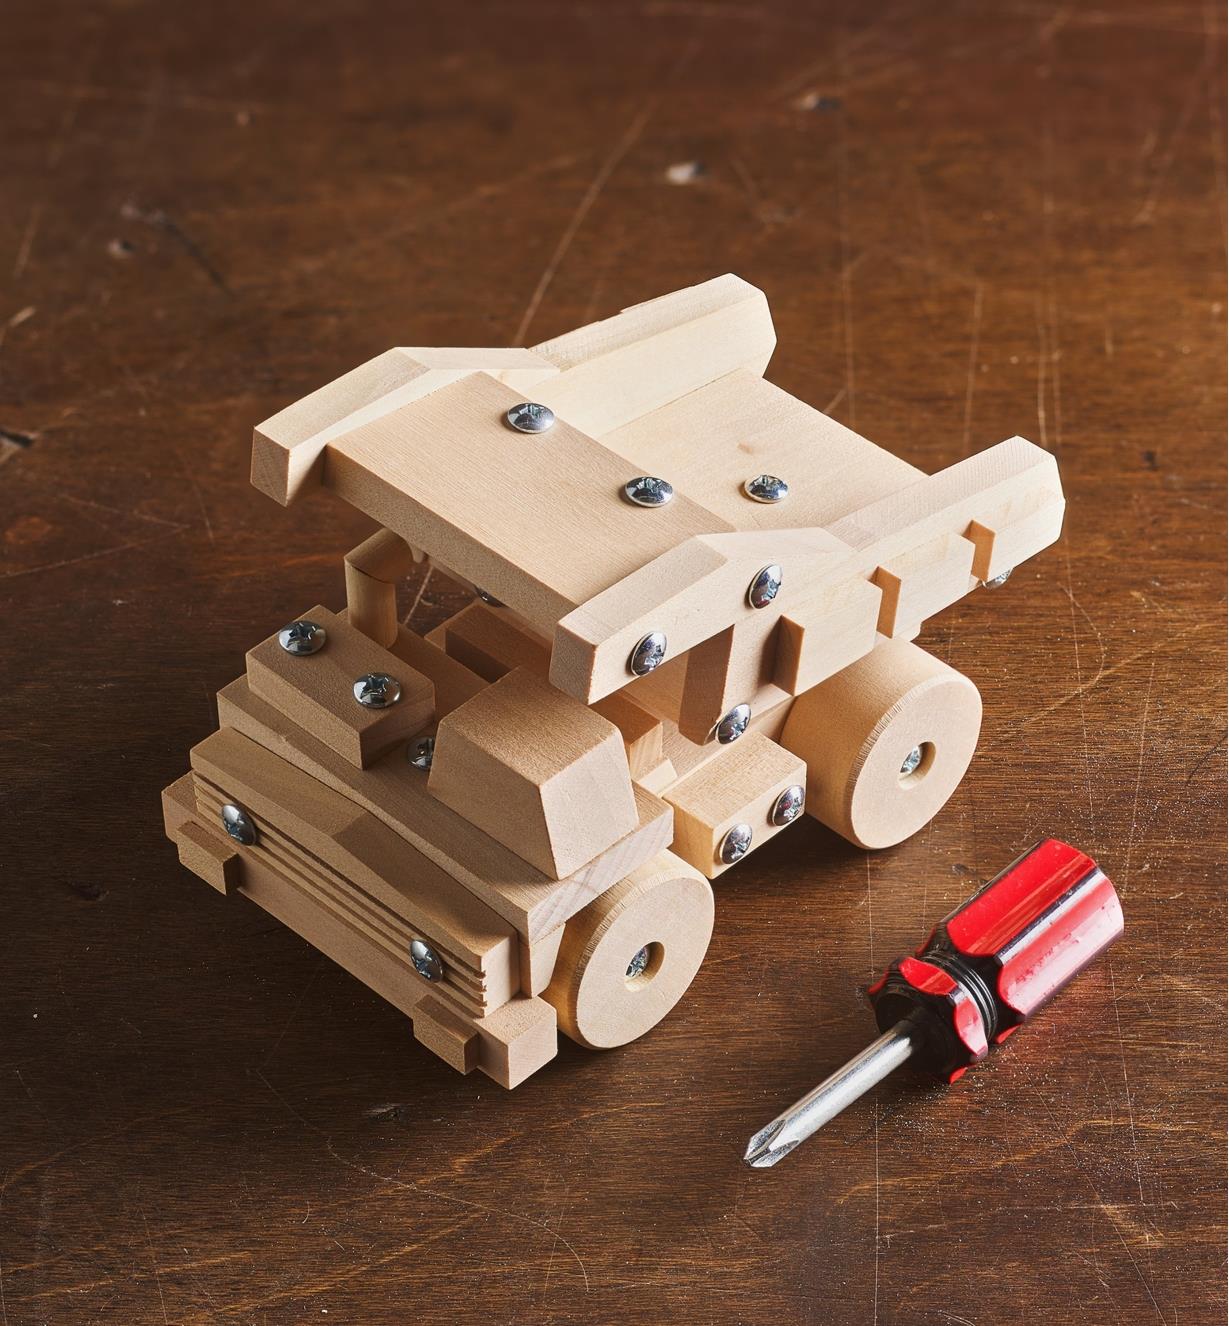 09A0557 - Dump Truck Easy-To-Build Wooden Toy Kit